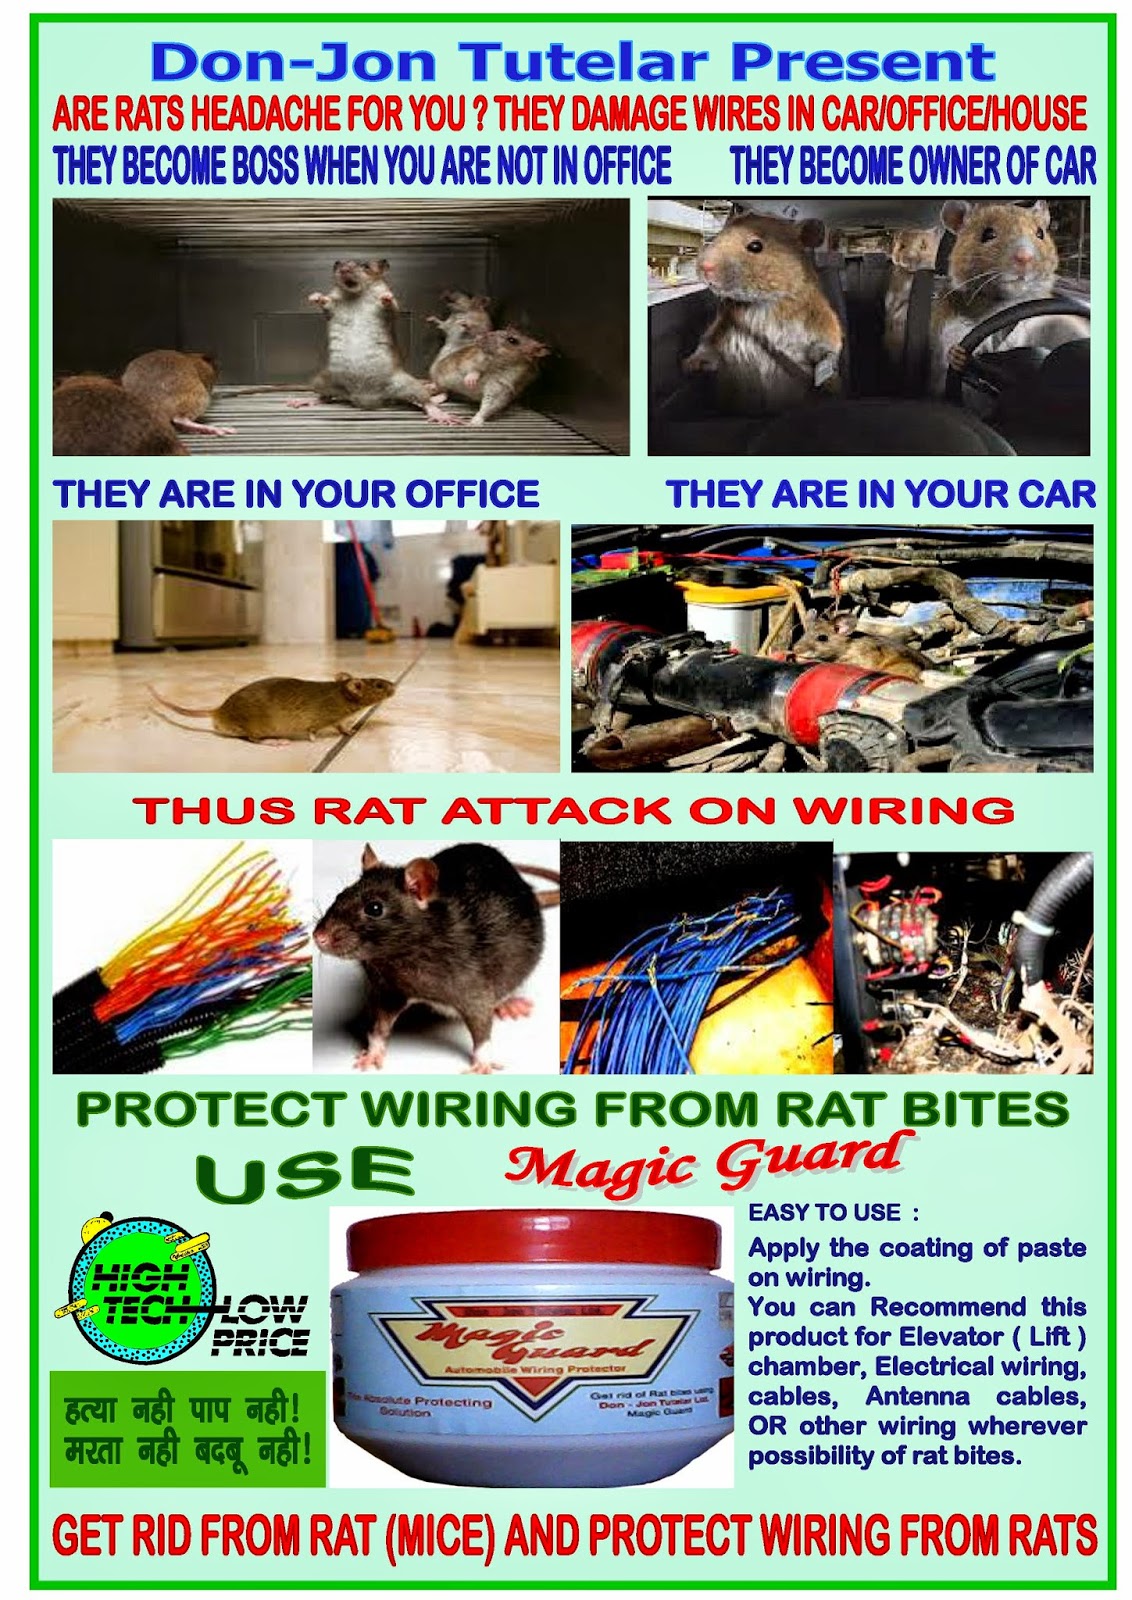 Keep Rats Away From Car Wiring: February 2015